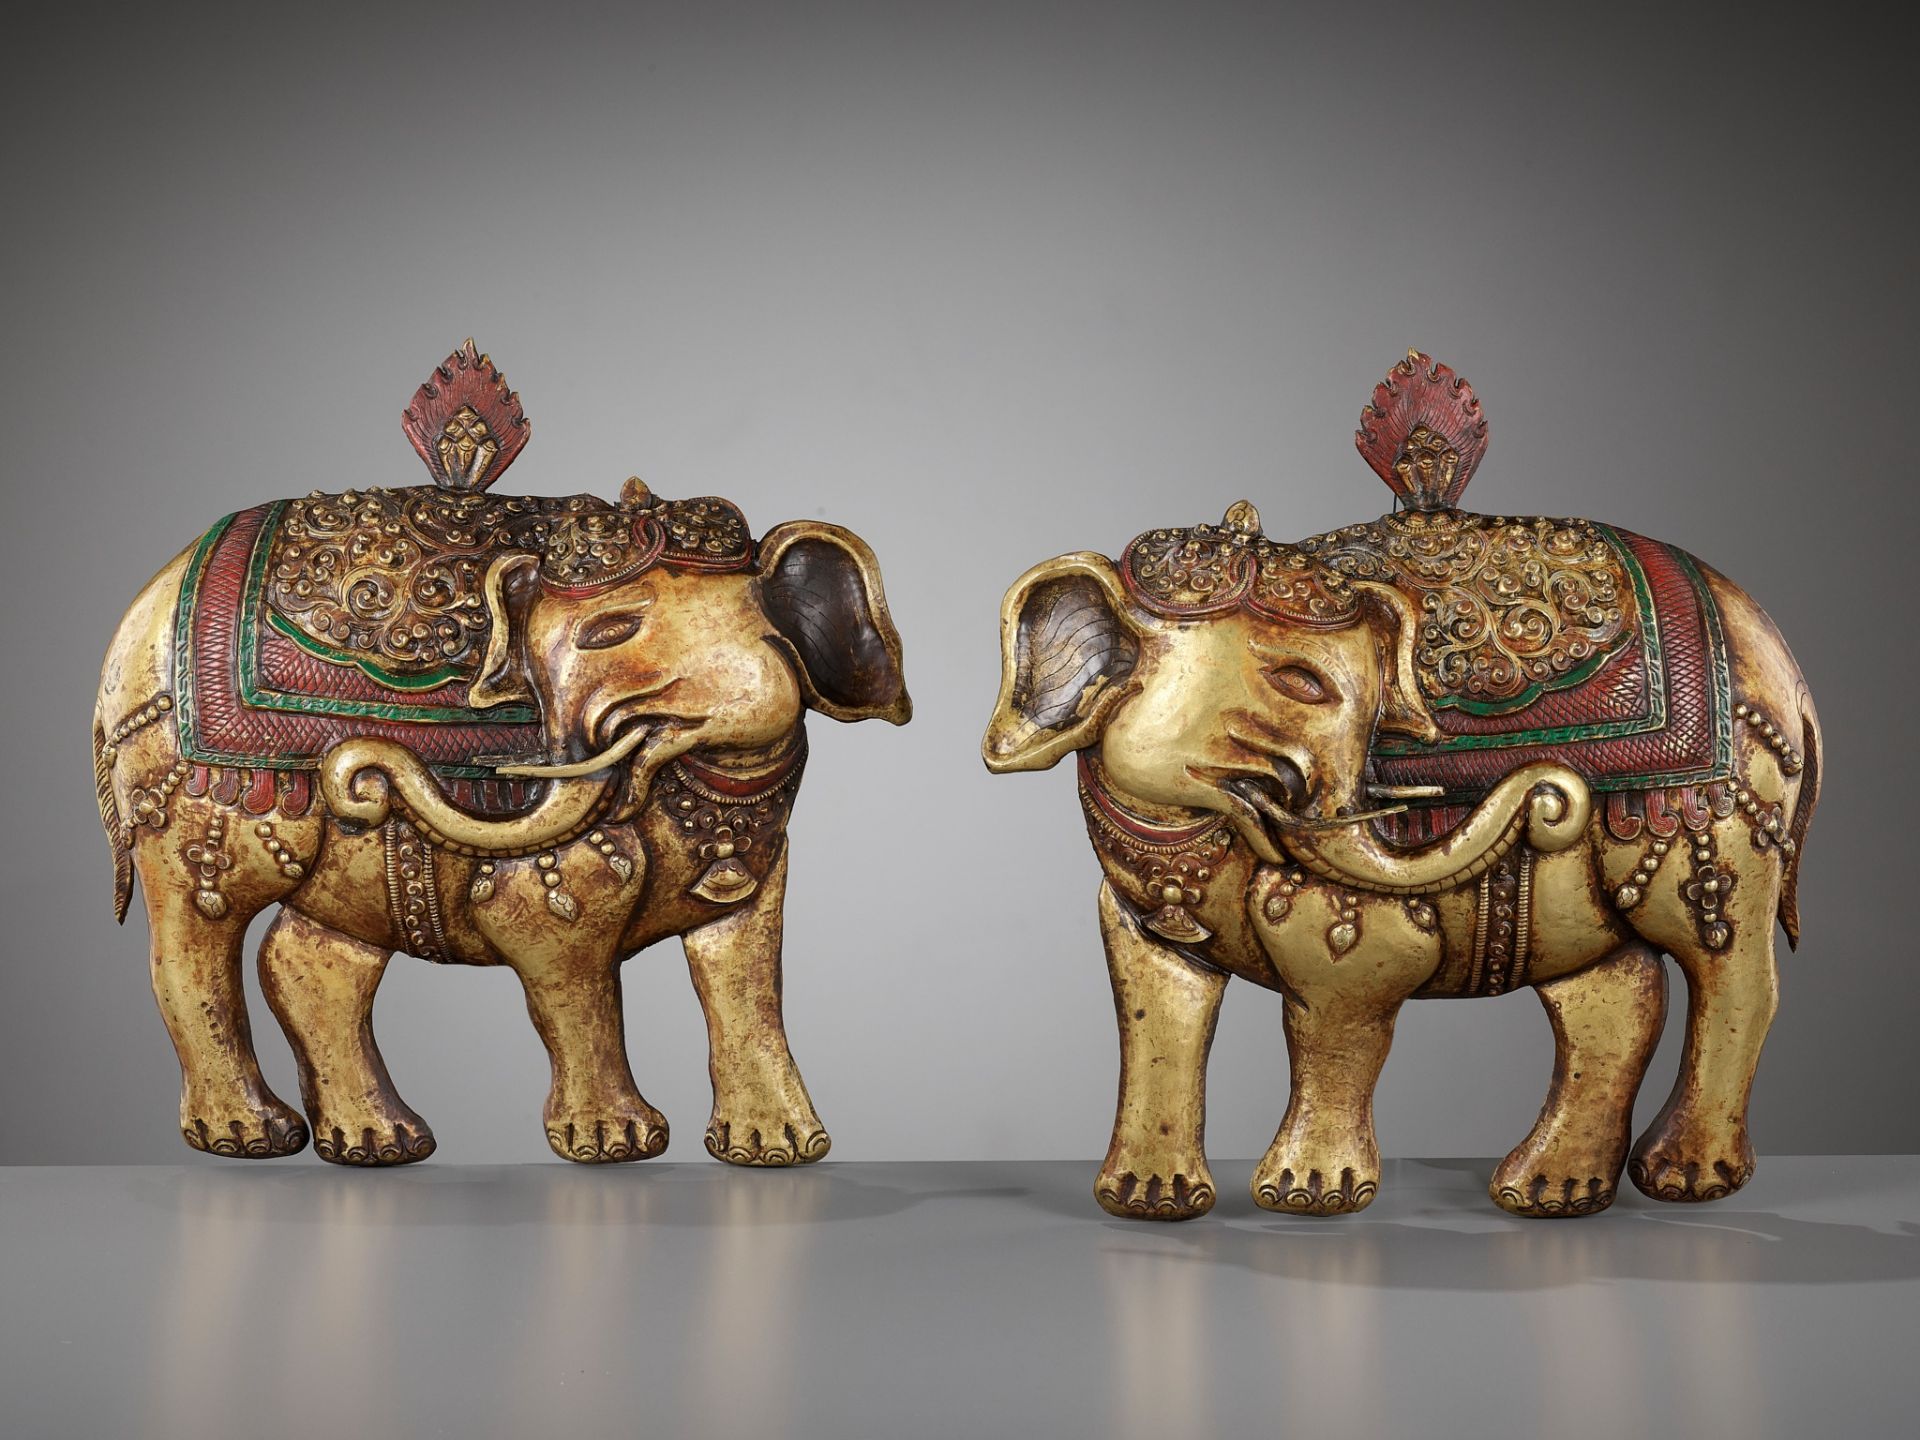 A PAIR OF GILT AND POLYCHROME-DECORATED COPPER REPOUSSE PLAQUES, HASTIRATNA, 17TH-18TH CENTURY